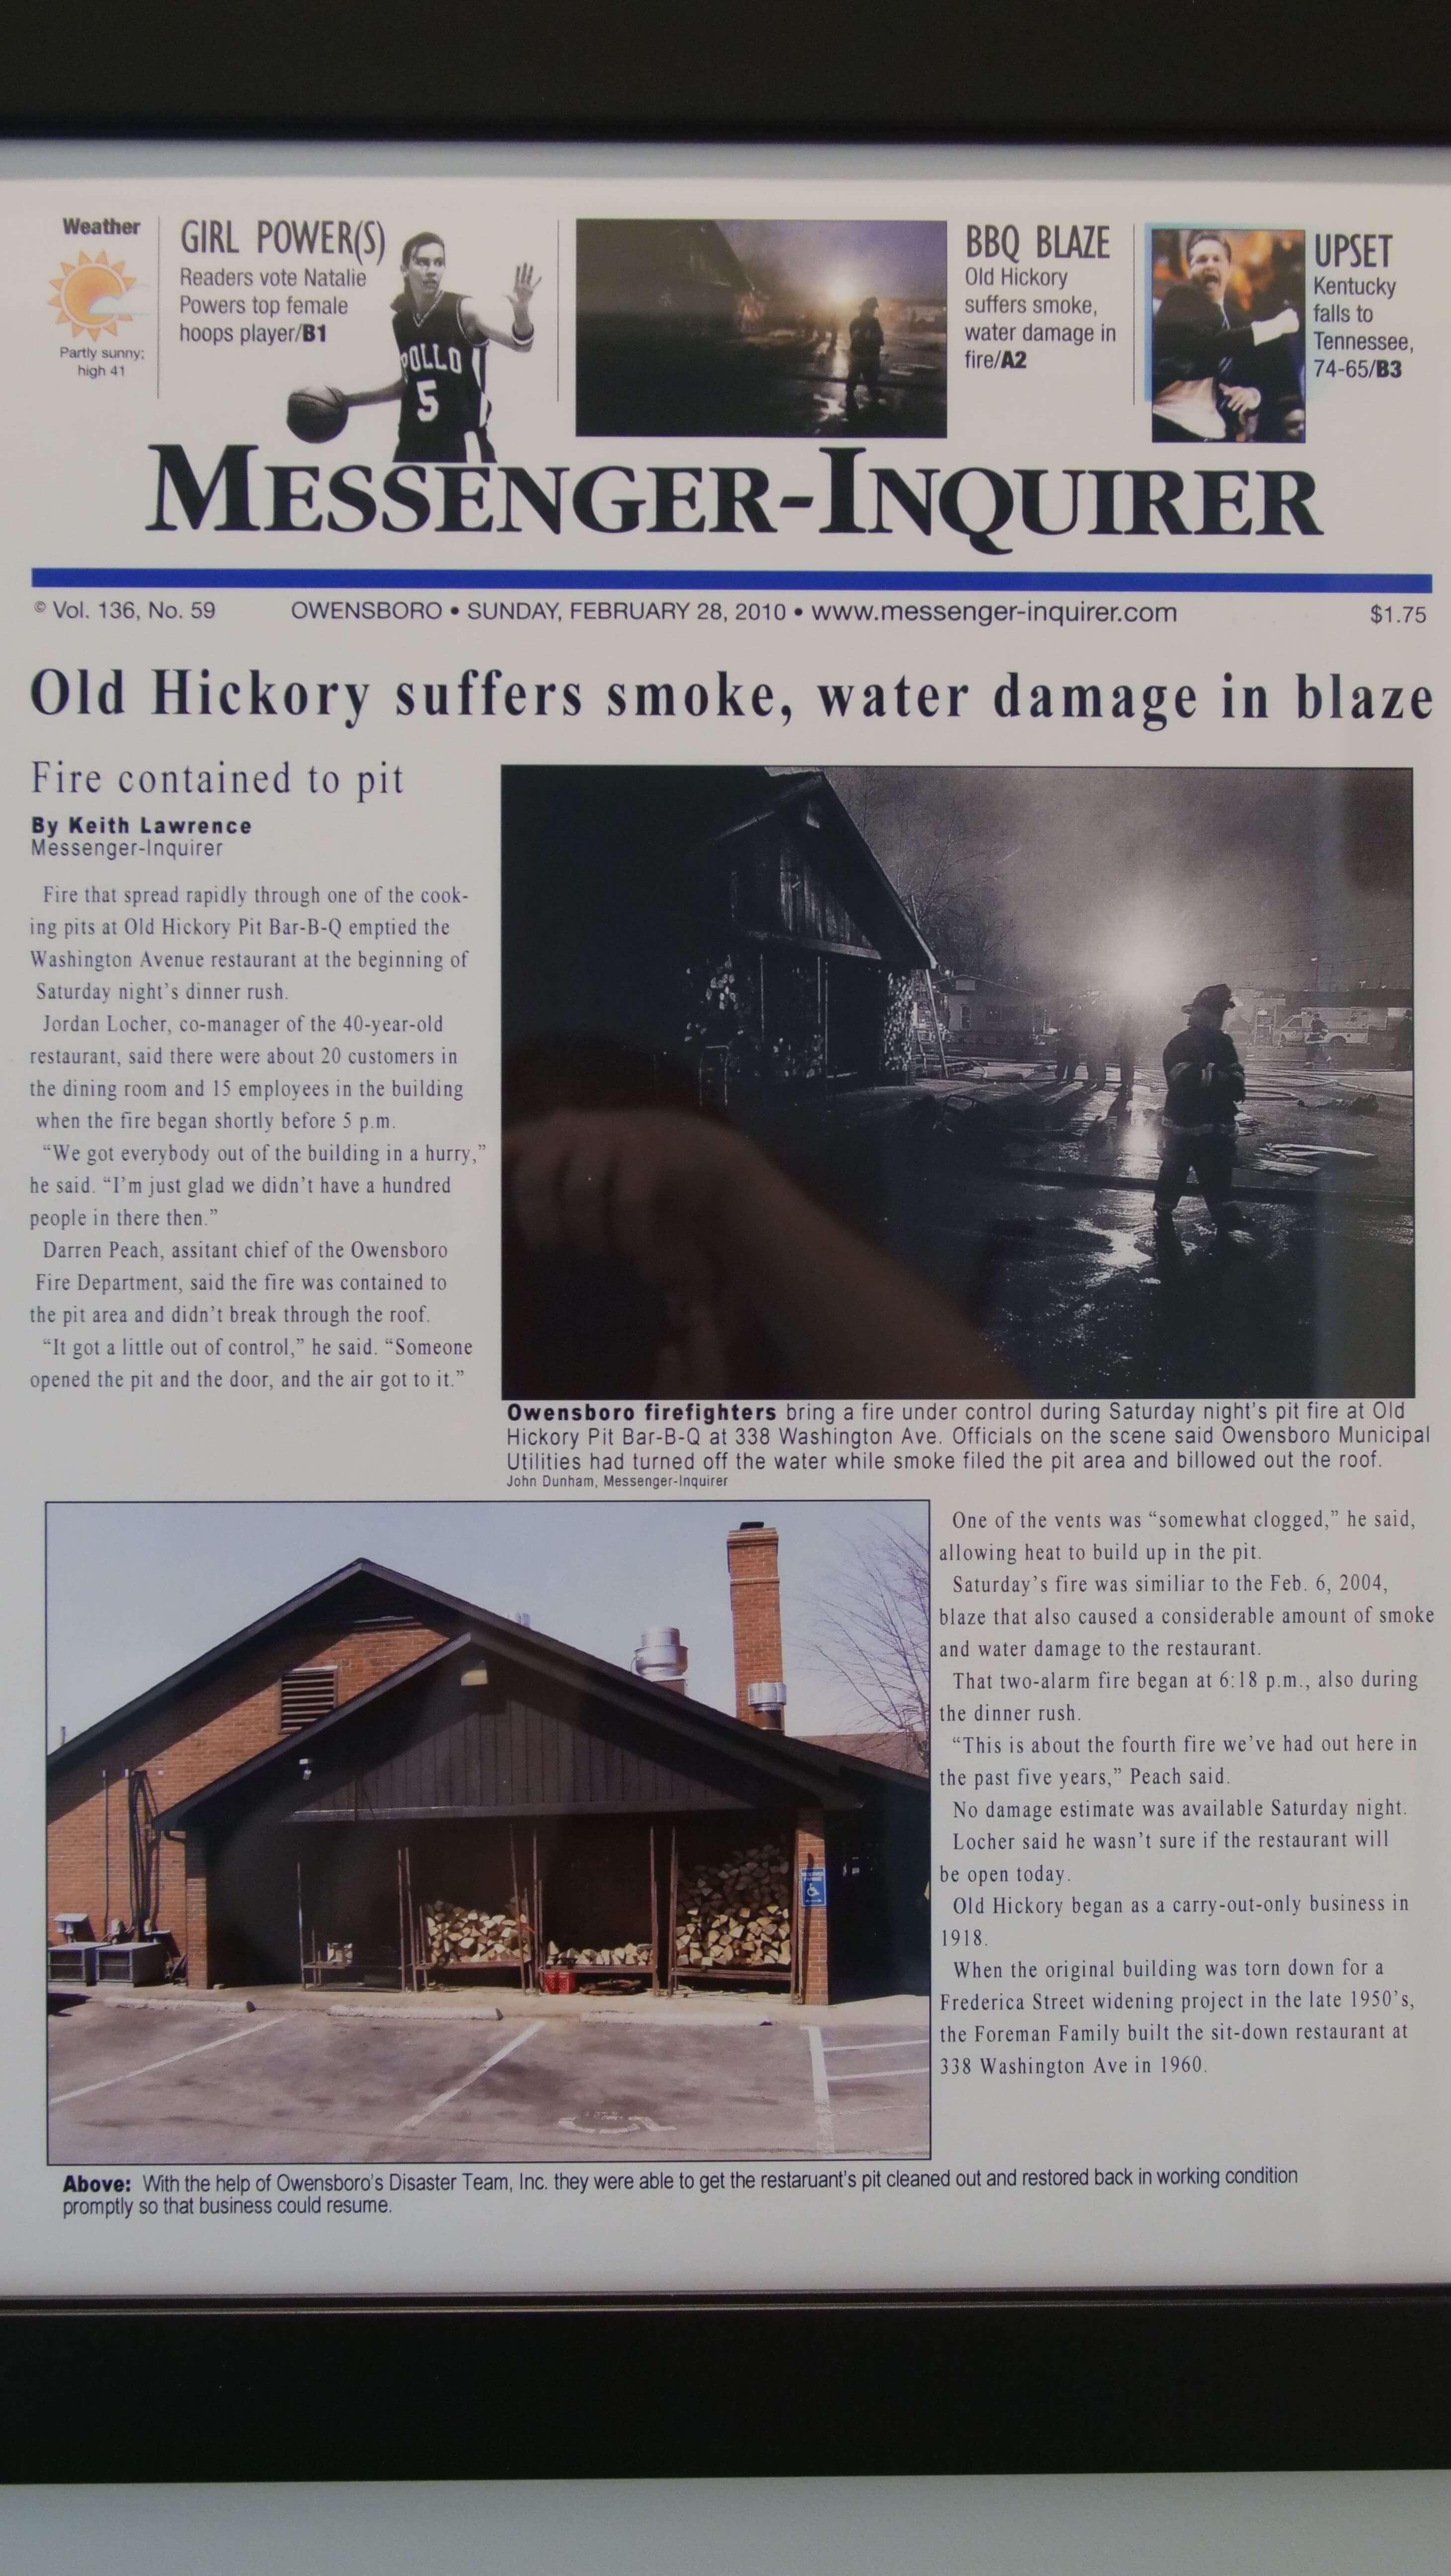 Newspaper showing Old Hickory fire aftermath